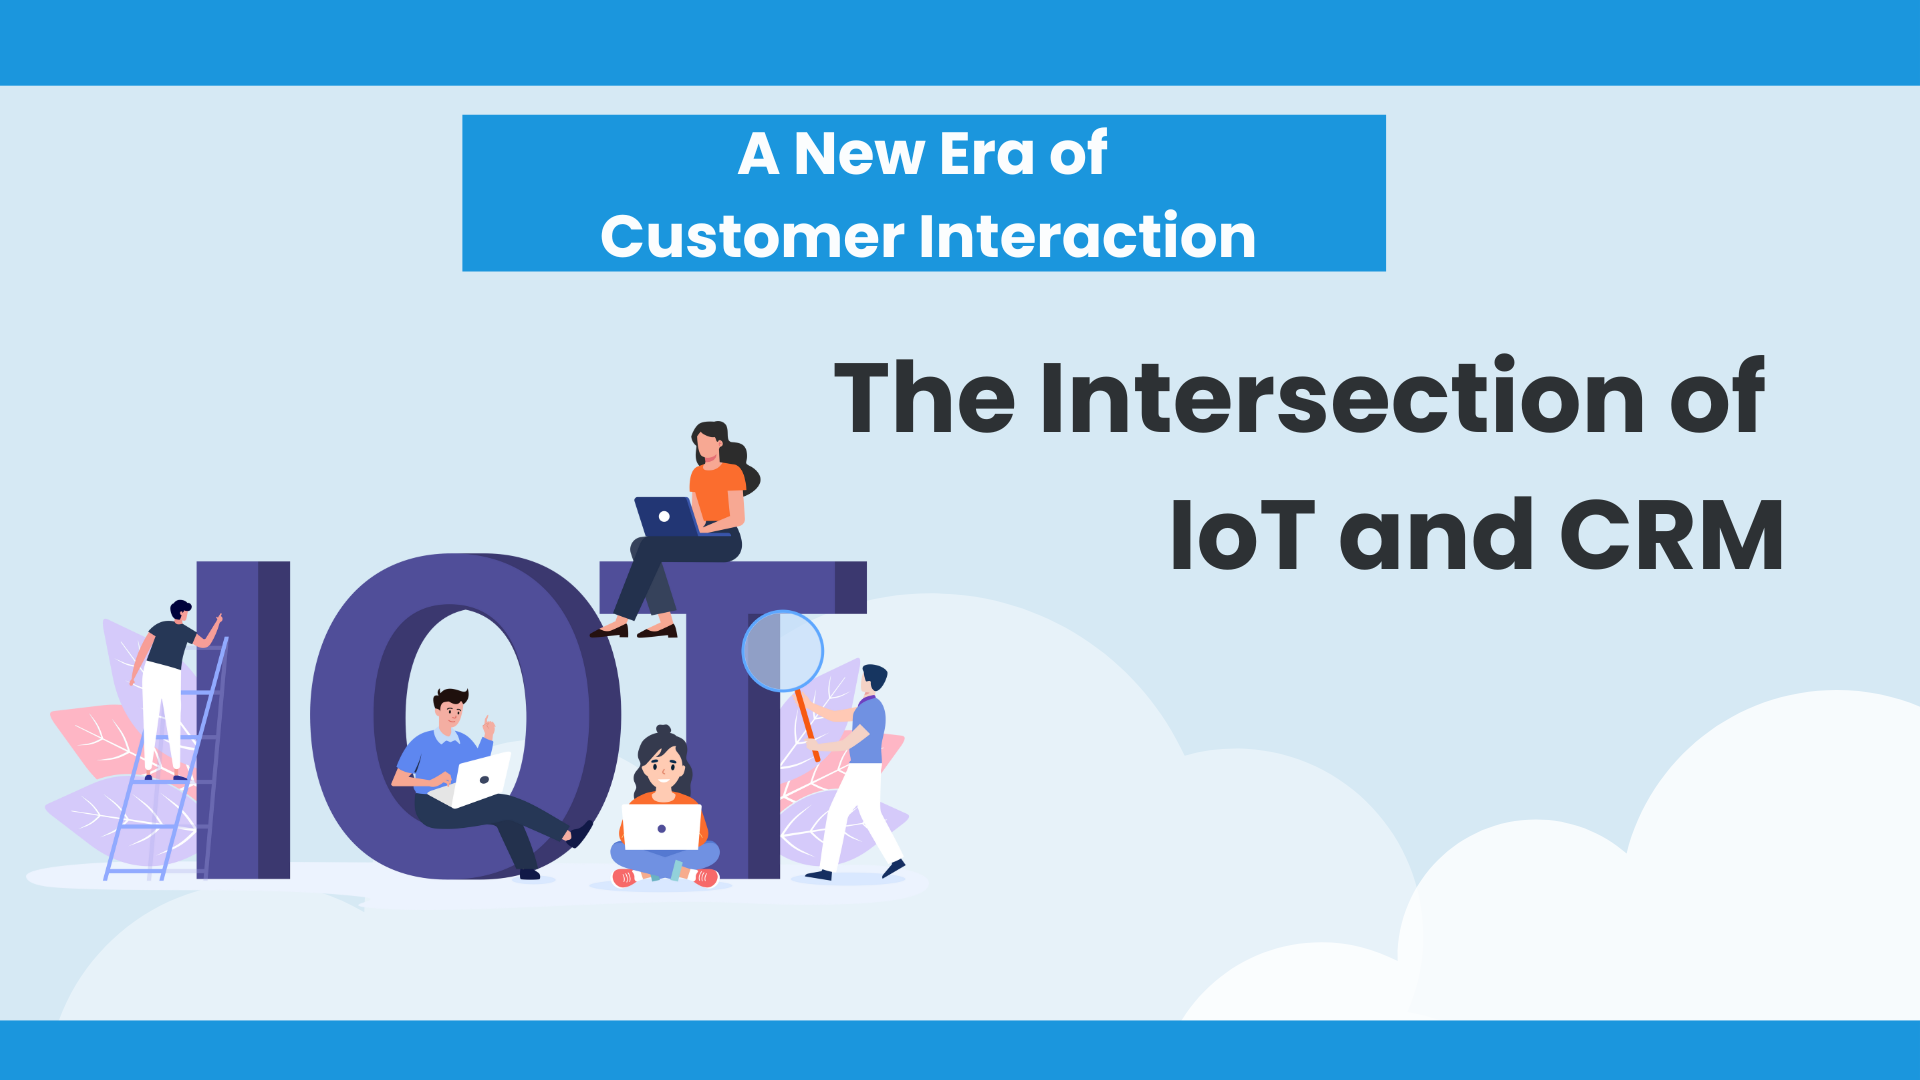 The Intersection of IoT and CRM: A New Era of Customer Interaction